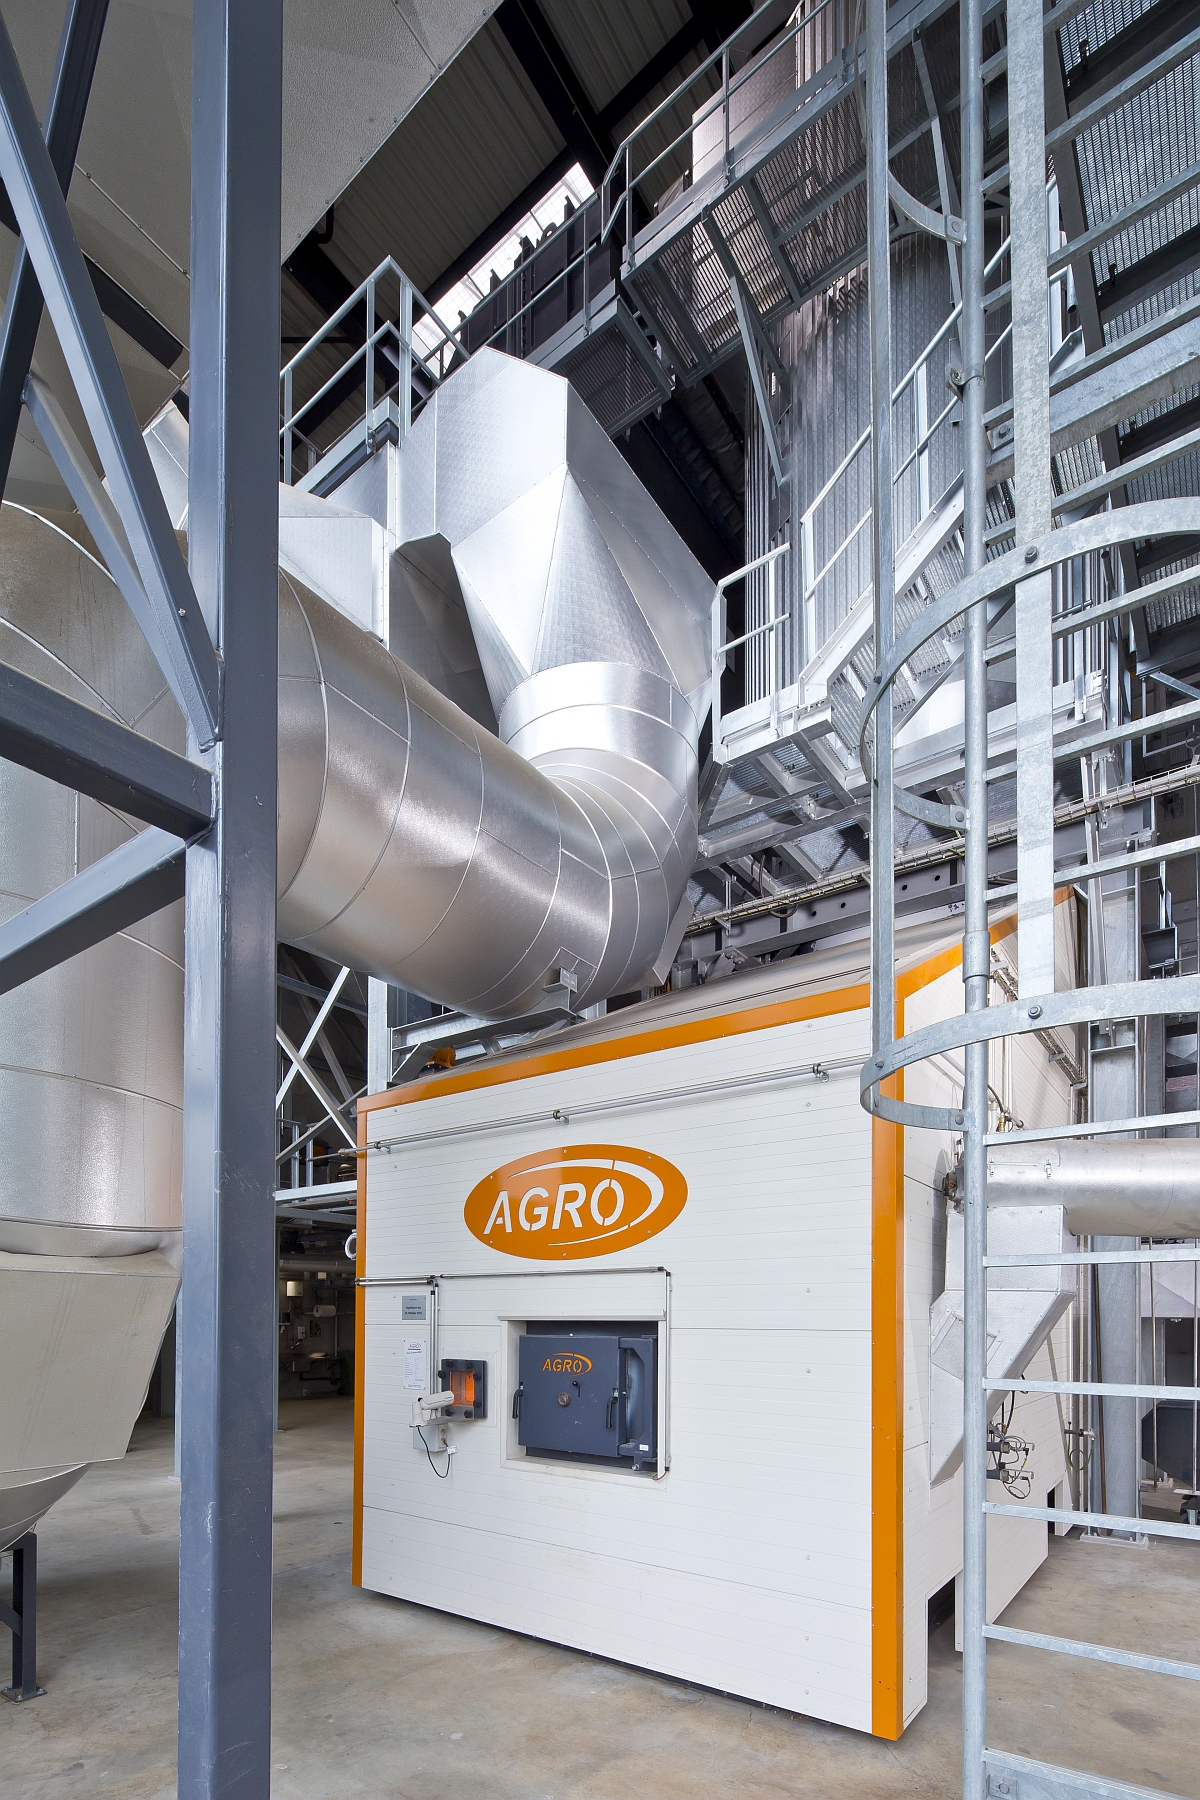 Tschopp Holzindustrie – AGRO thermal oil boiler for waste wood combustion